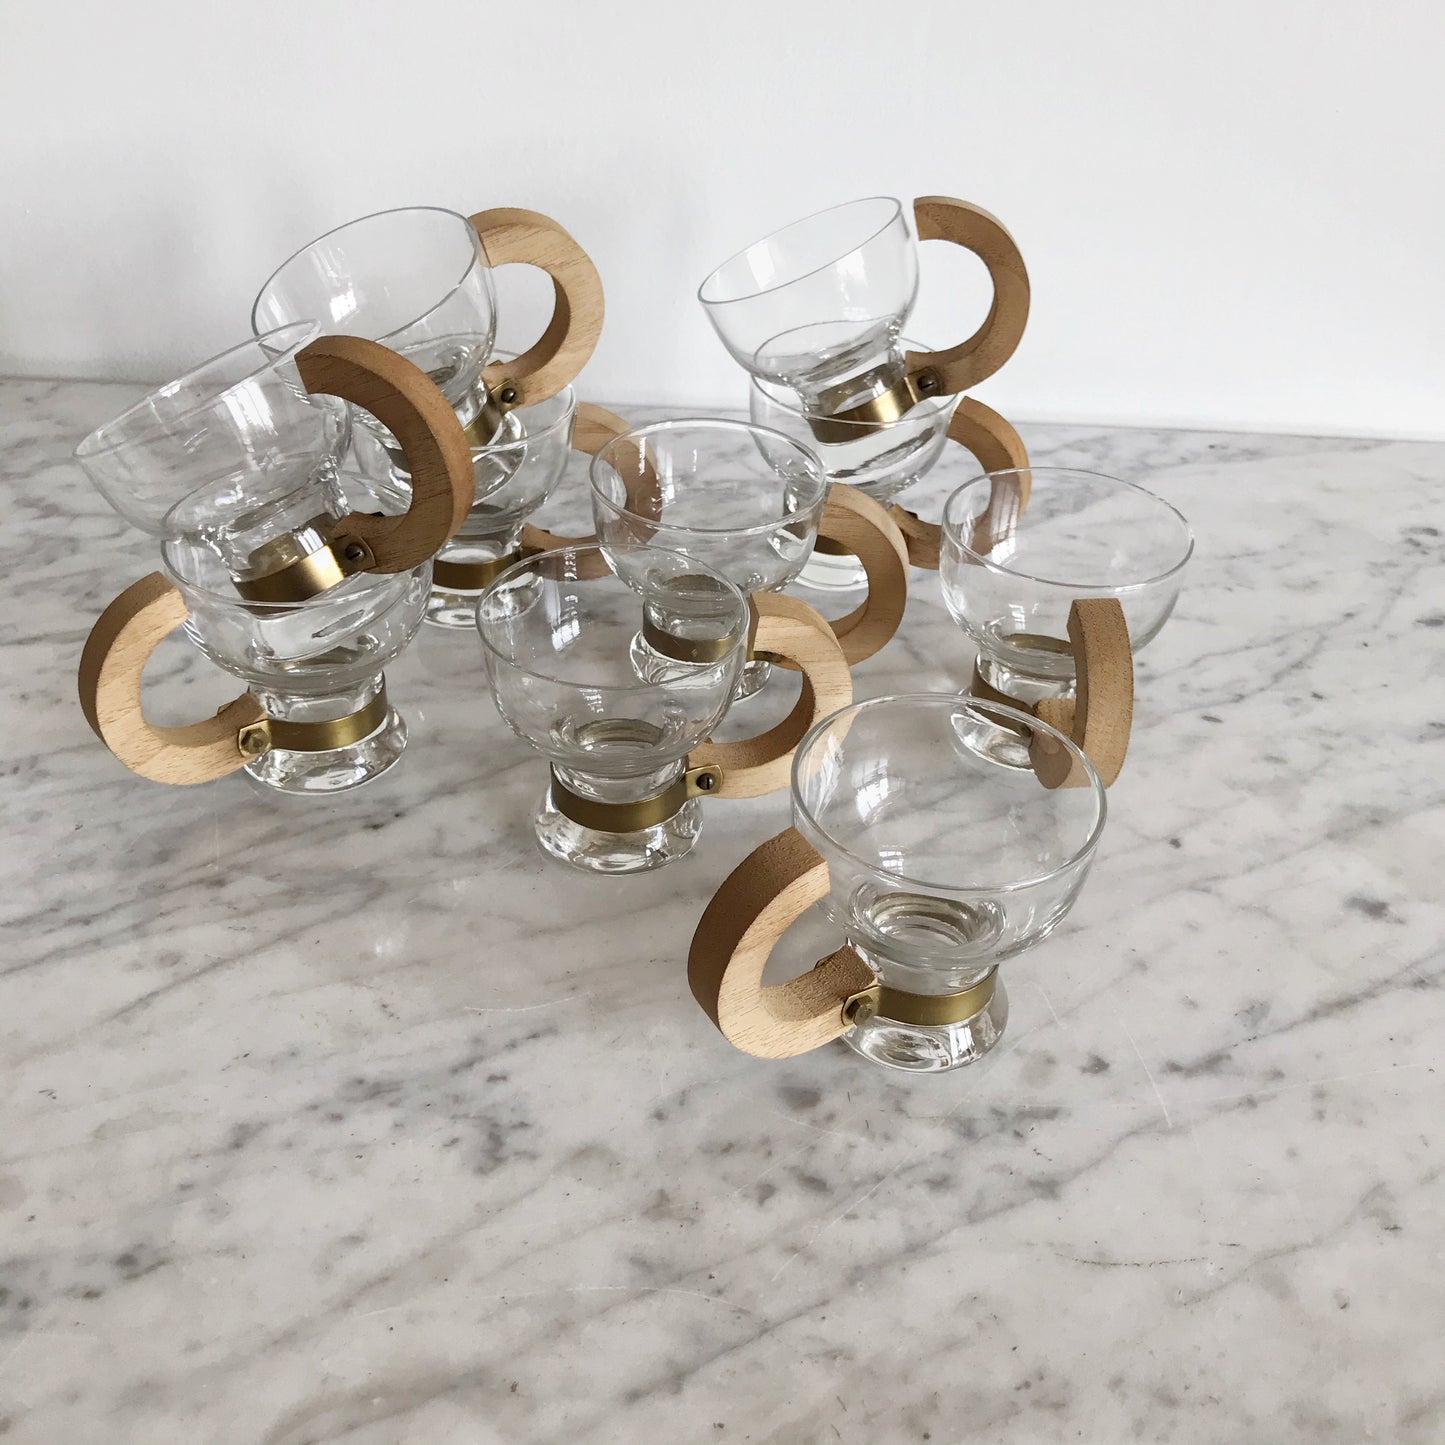 Set of 10 Glass Espresso Cups with Wooden Handles